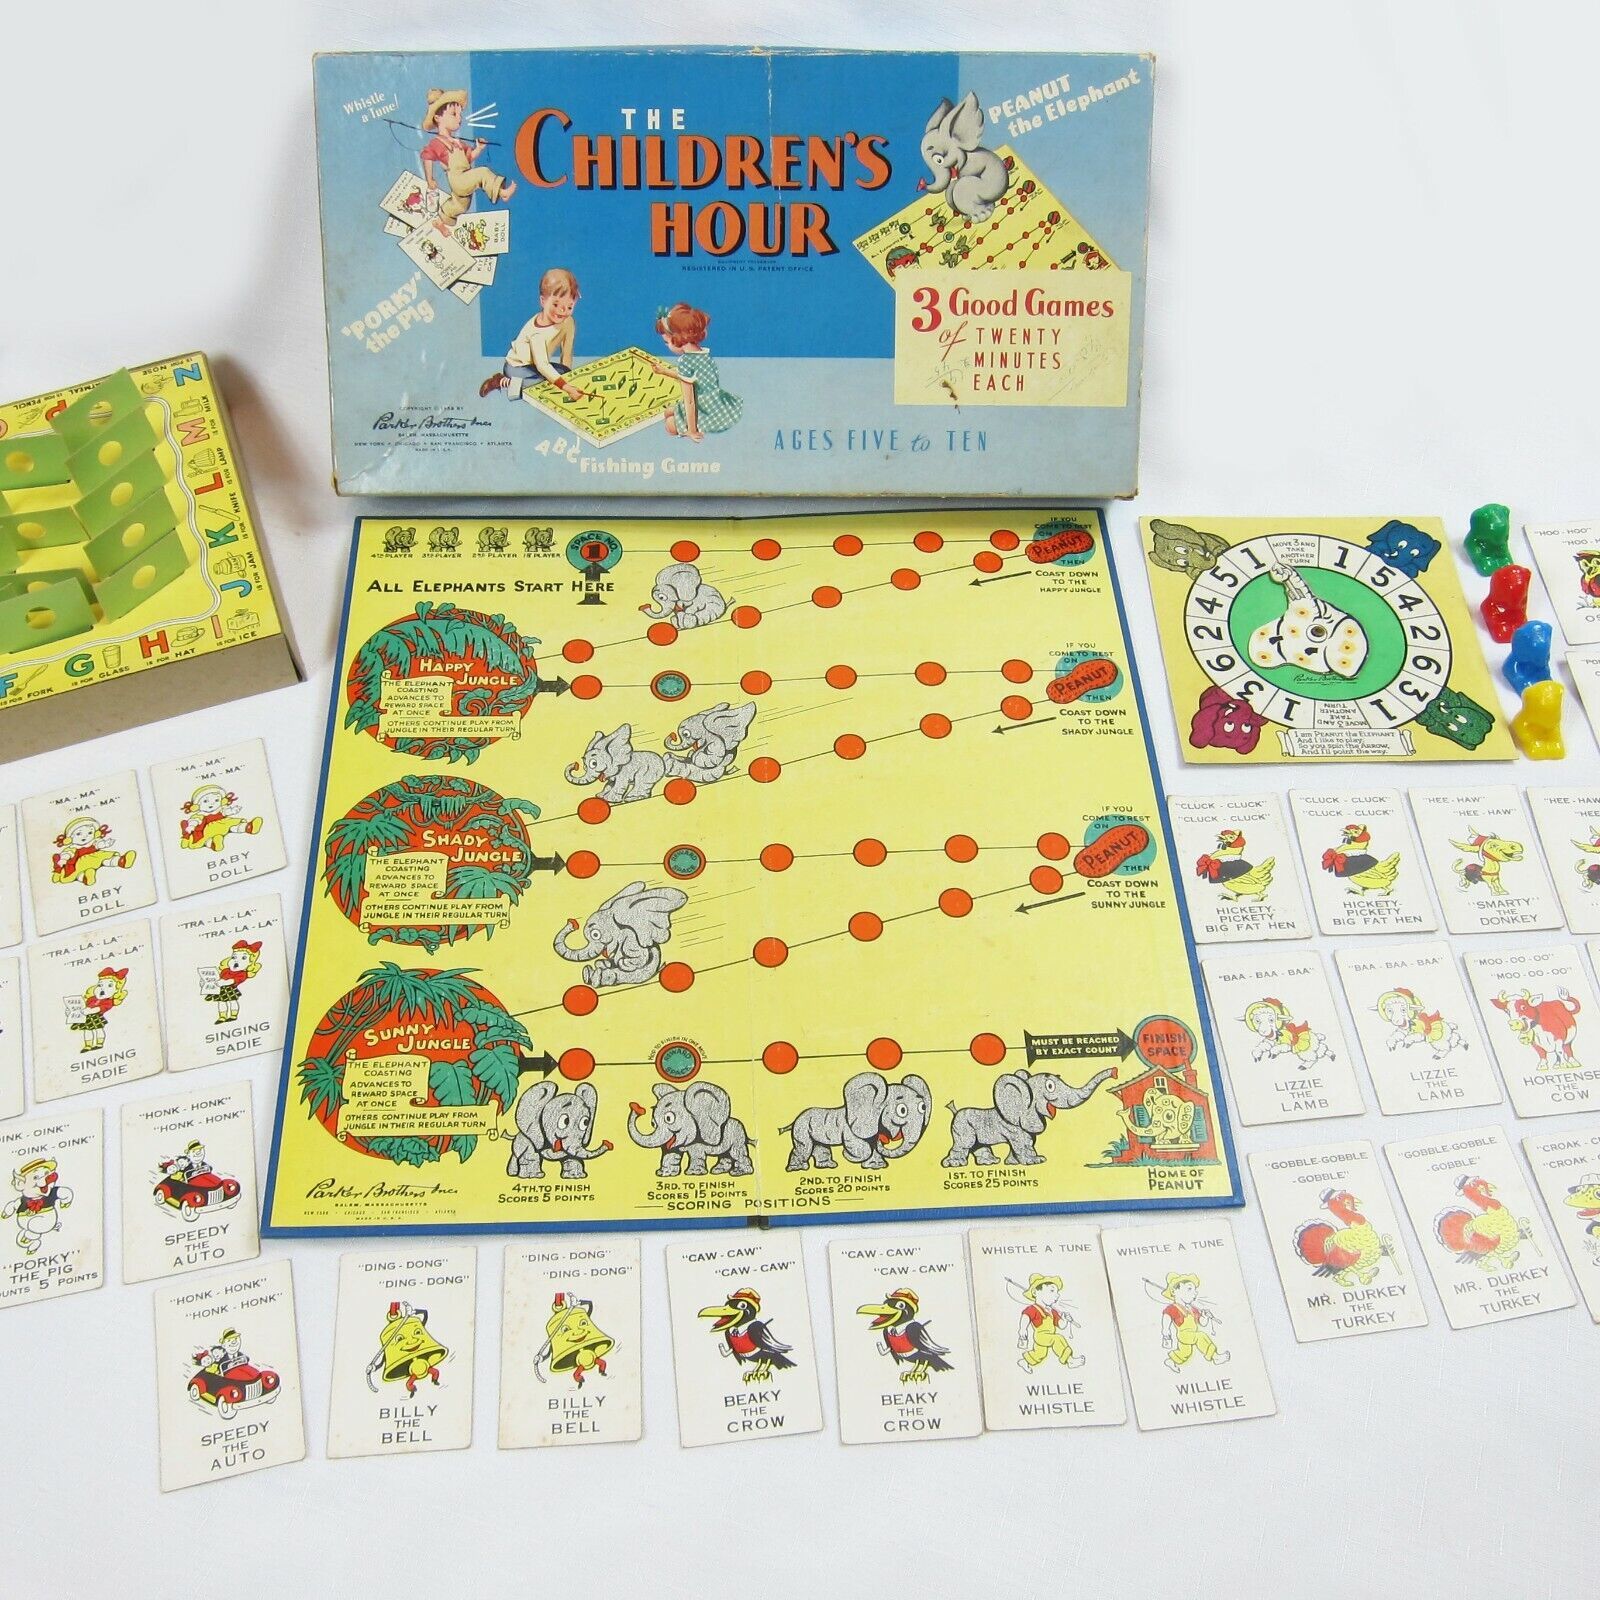 Vintage 1958 The Children's Hour Parker Brothers 3 Games in 1, Each 20 minutes - $24.99